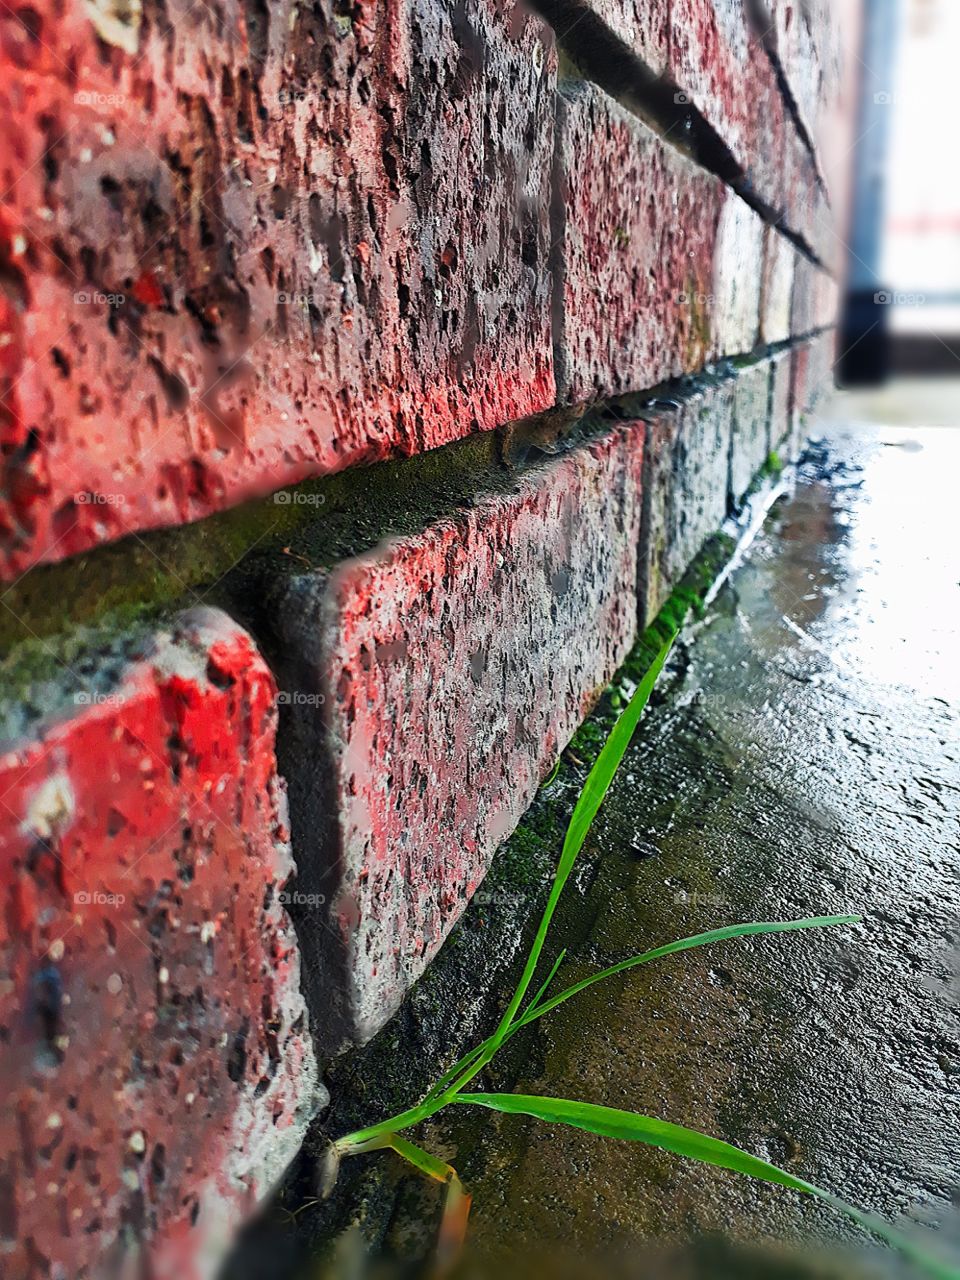 Growing From The Wall